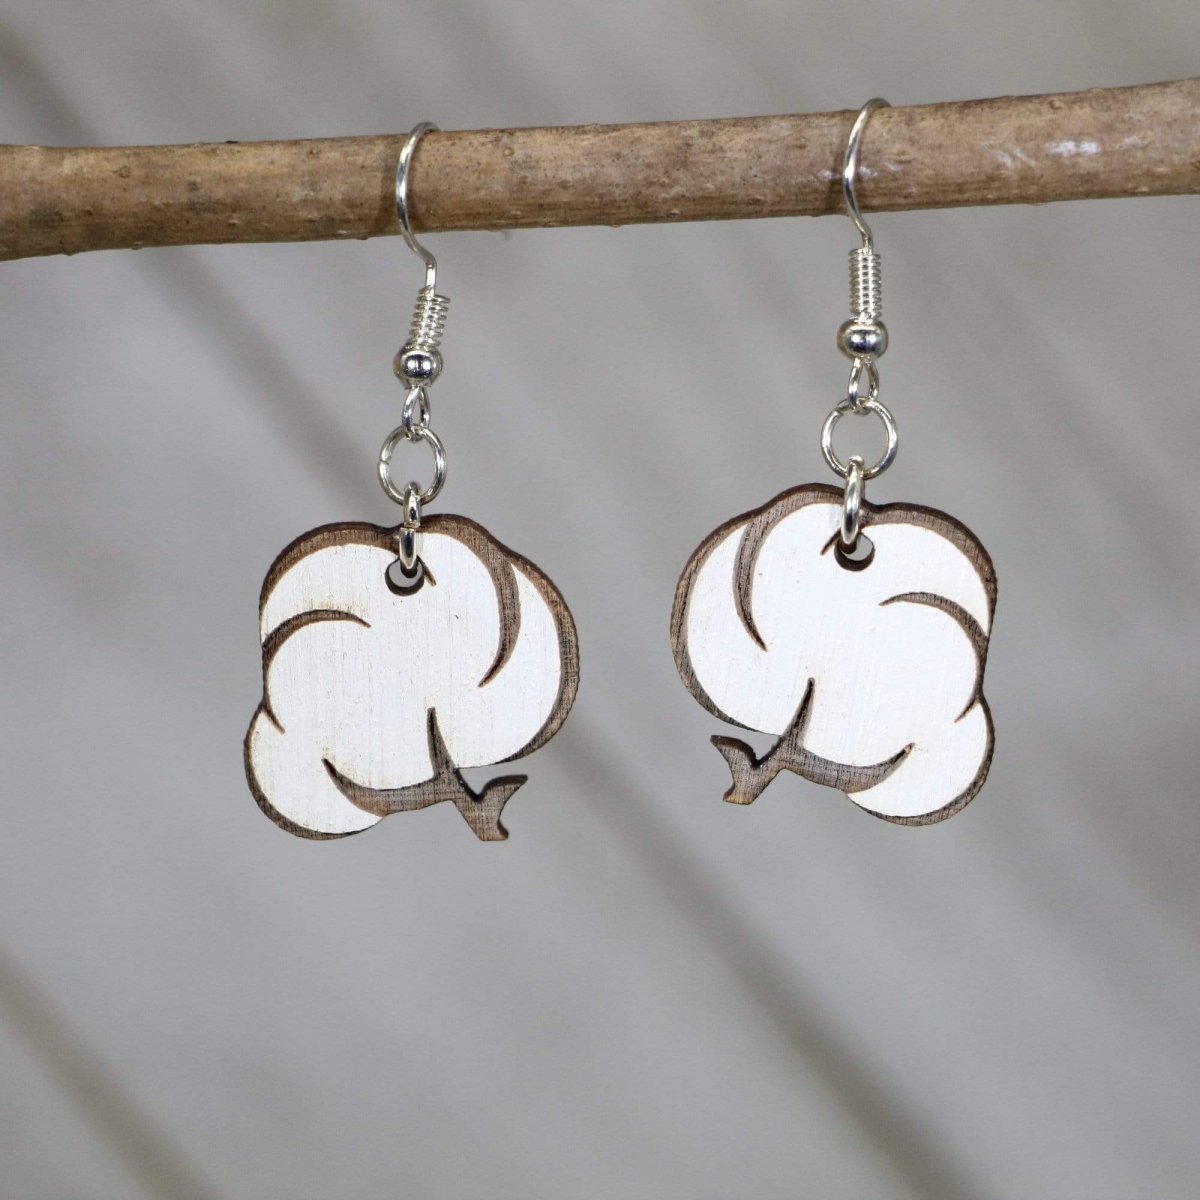 Cotton Boll Wooden Dangle Earrings - - Cate's Concepts, LLC